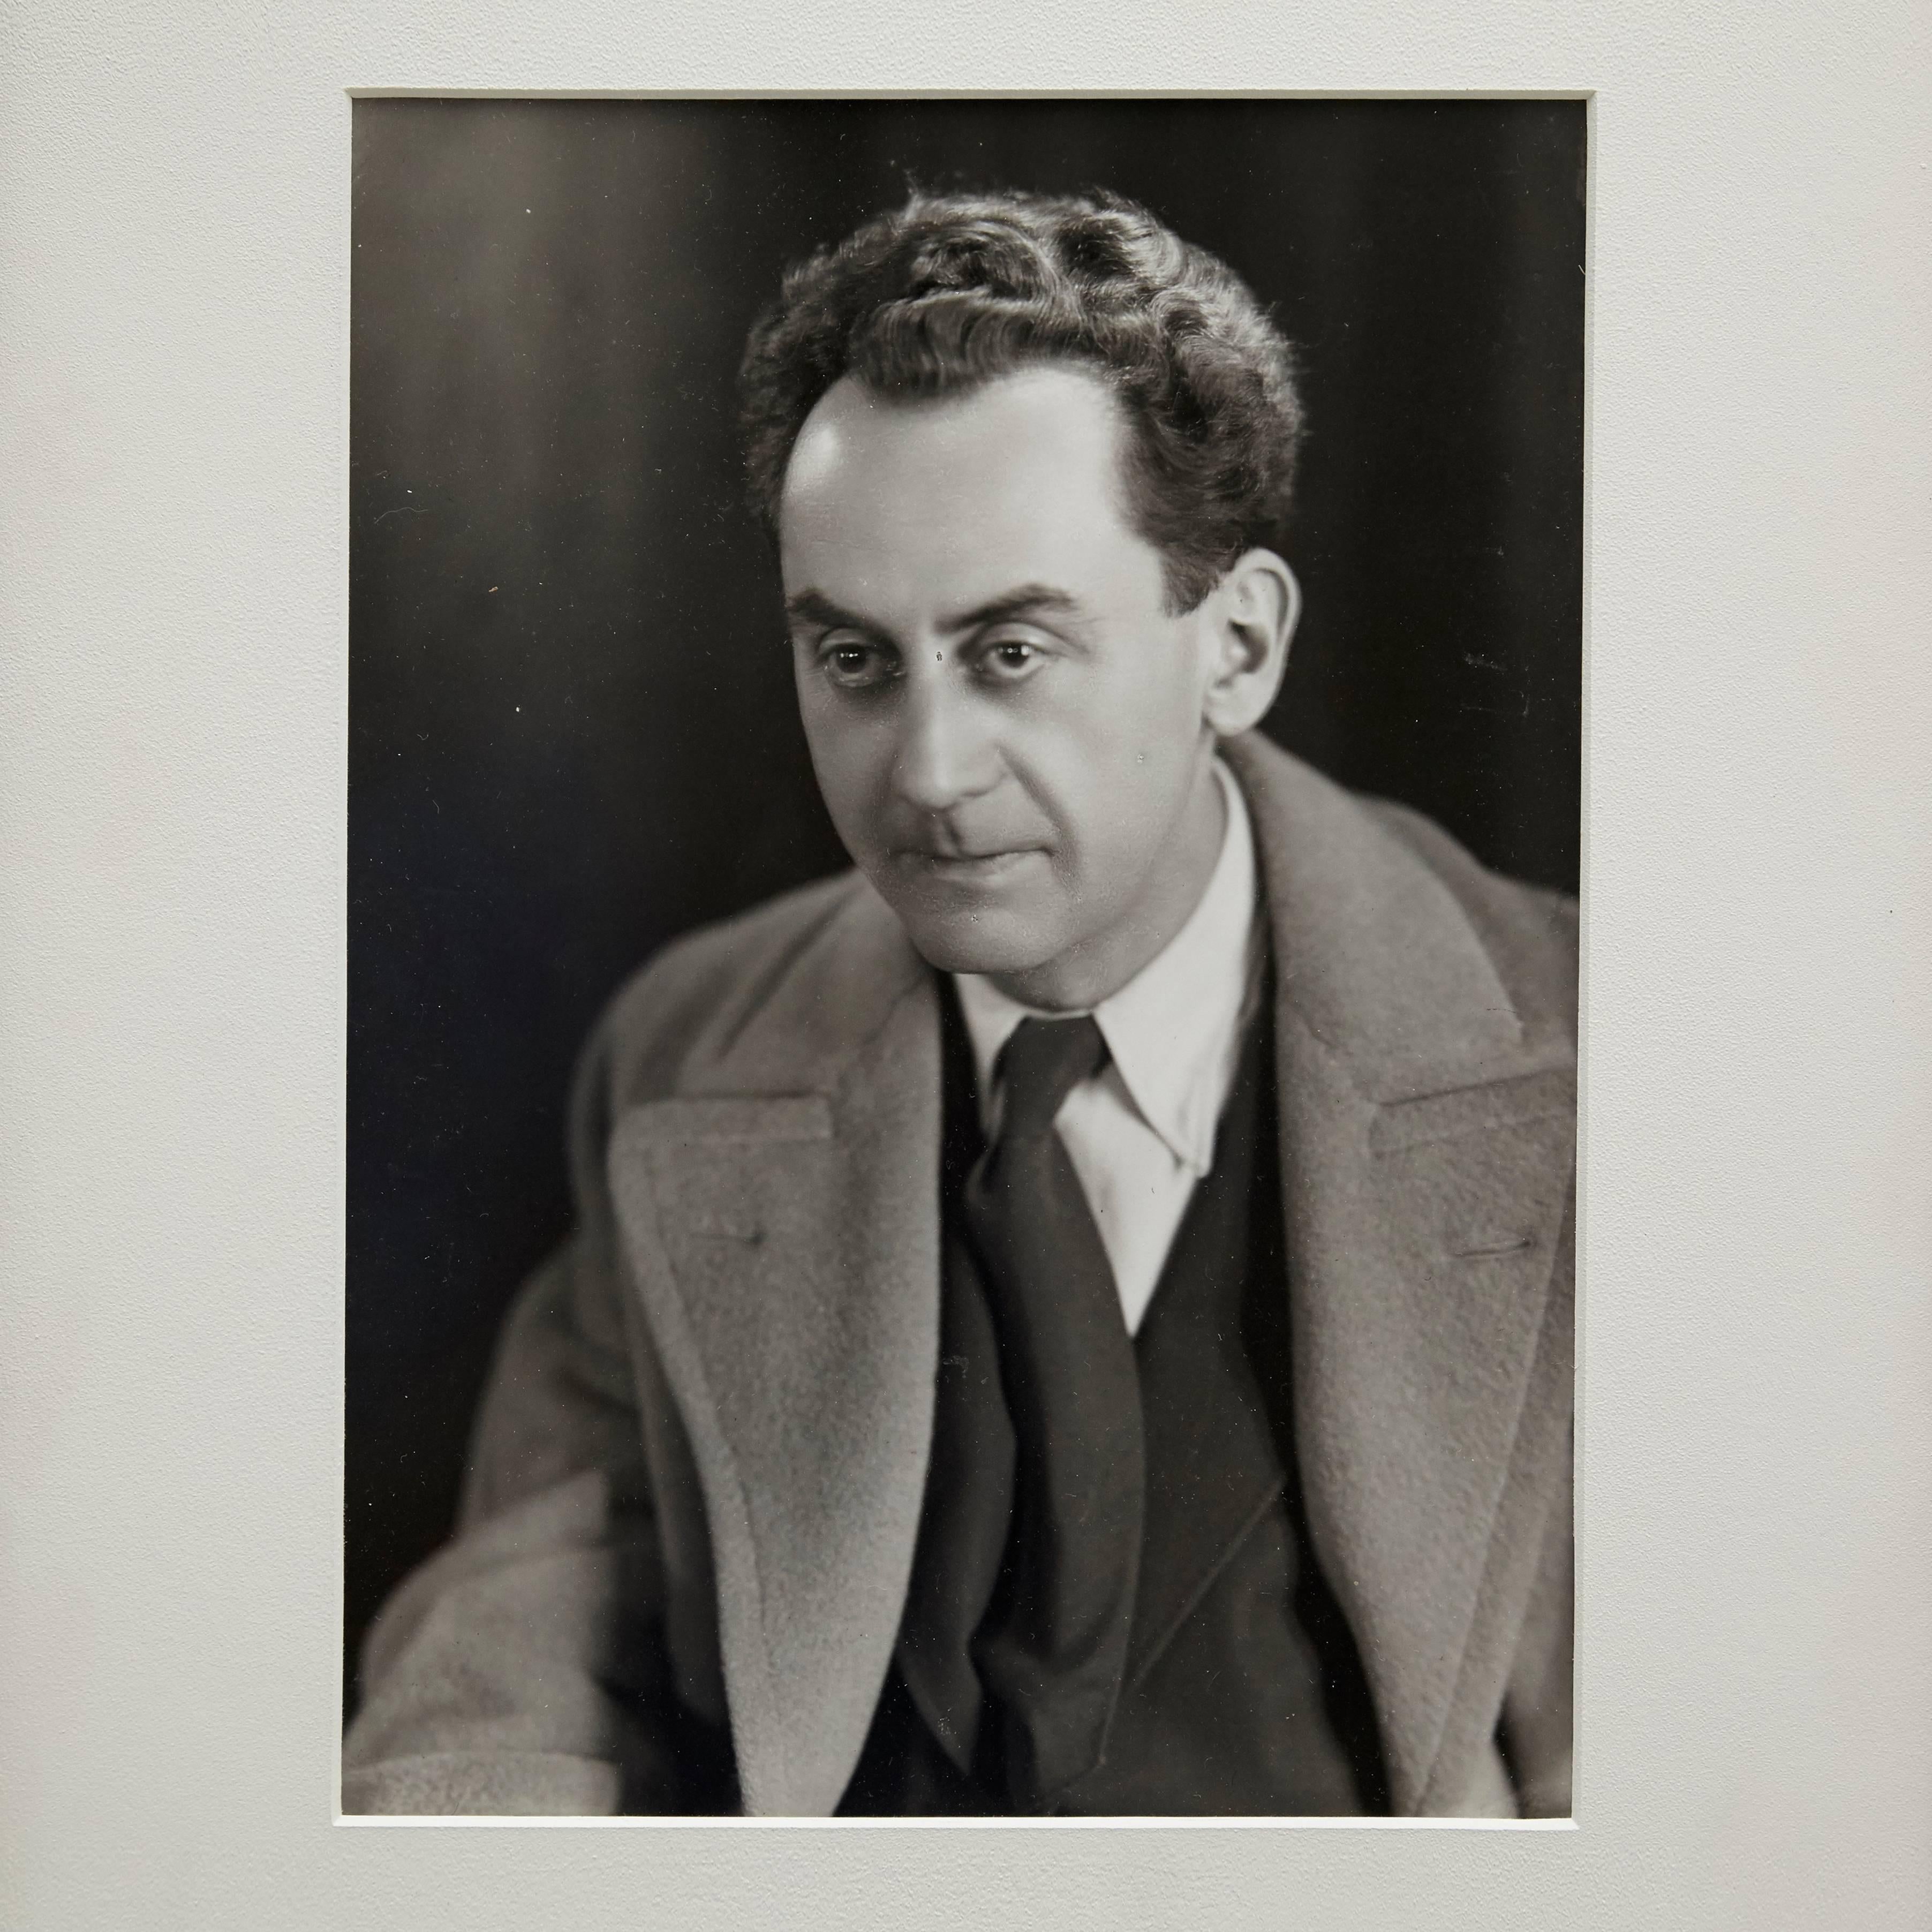 Selfportrait photographed by Man Ray.

A posthumous print from the original negative circa 1970 by Pierre Gassmann. Gelatin silver bromide.

Framed in a 19th century frame with museum glass.

Stamped in the back with Man Ray Paris Stamp and